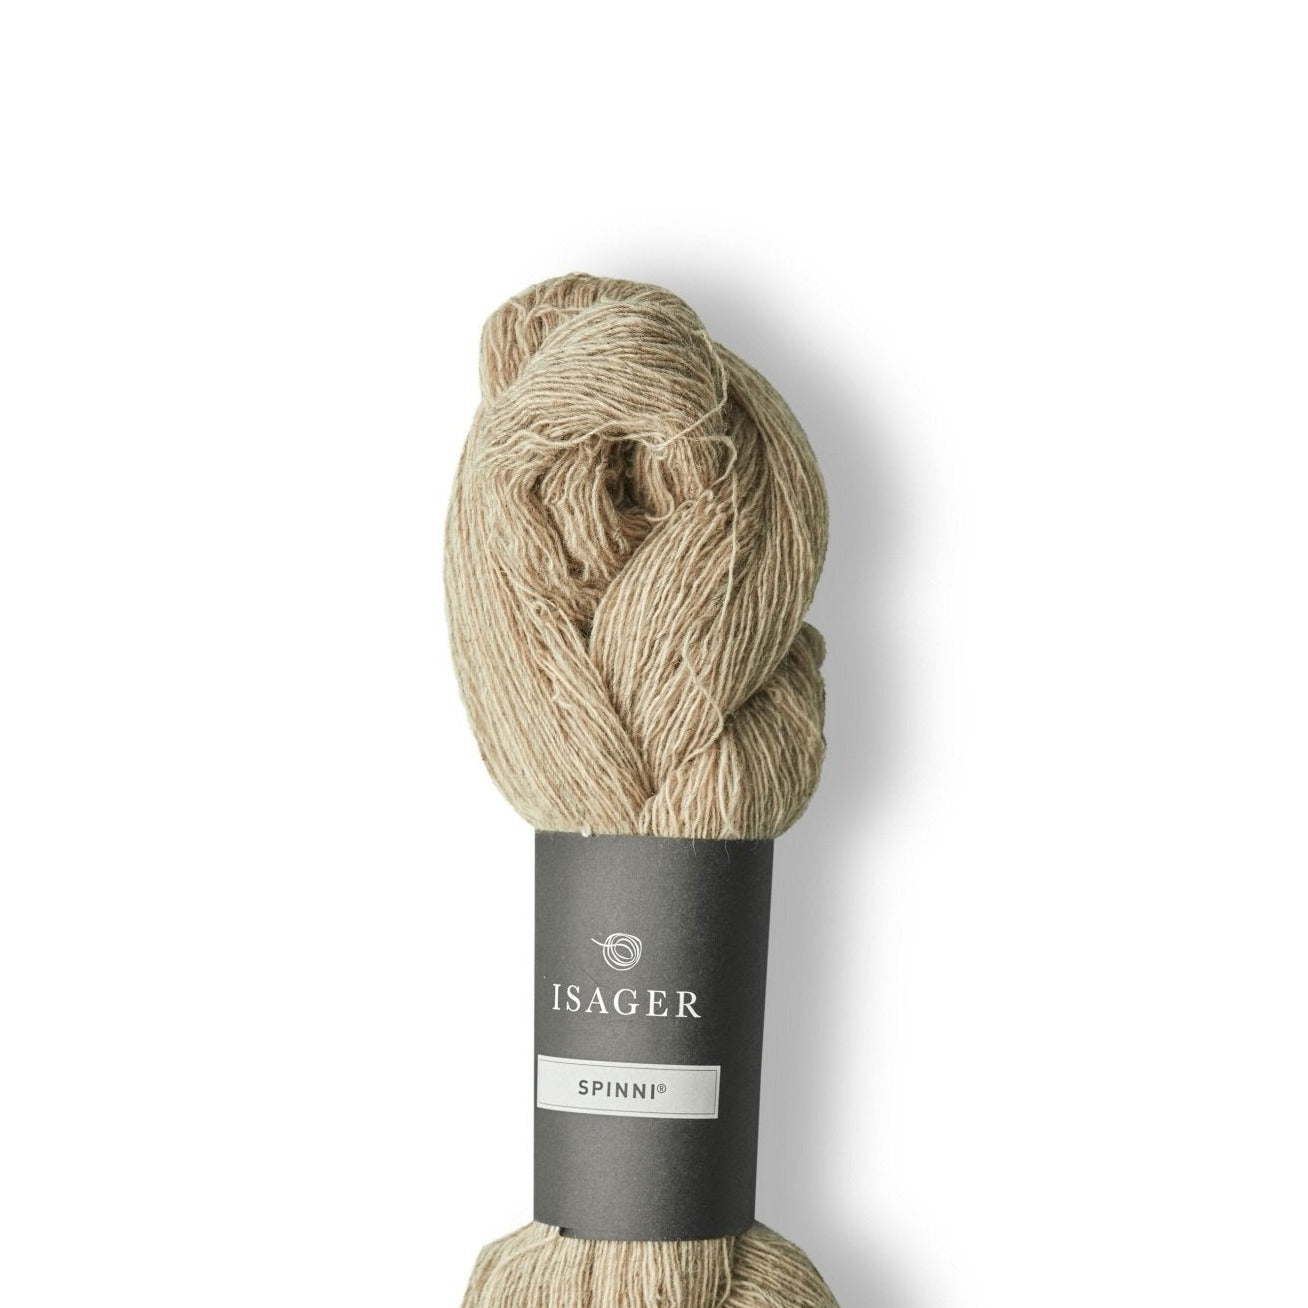 Isager Spinni - 61s - 2 Ply - Isager - The Little Yarn Store